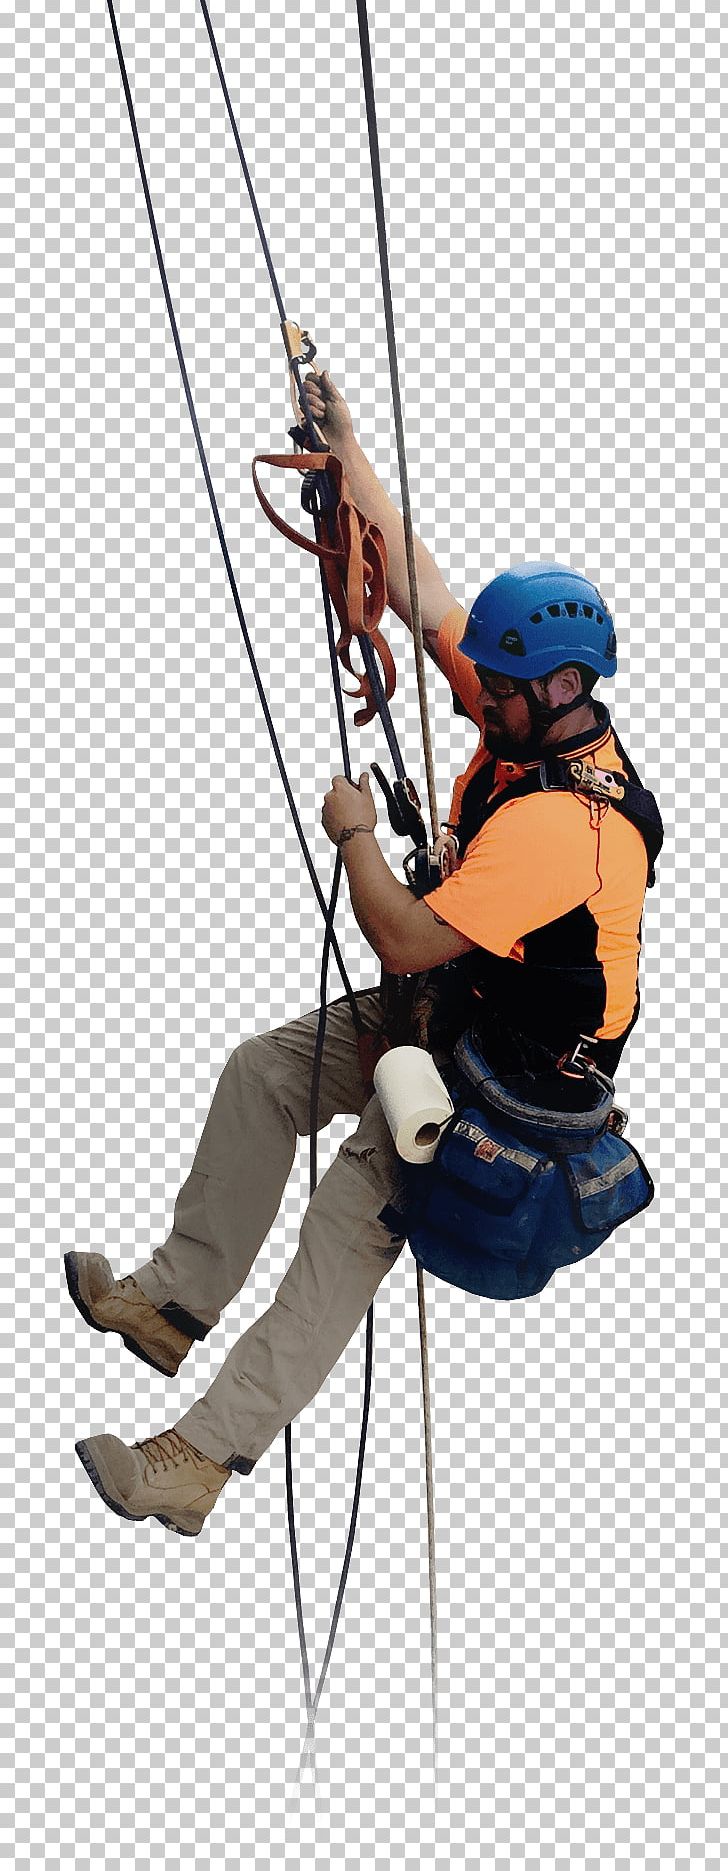 Abseiling Climbing Harnesses Specialist Height Access Pty Ltd Rope Access PNG, Clipart, Abseiling, Adventure, Architectural Engineering, Belay Device, Belaying Free PNG Download